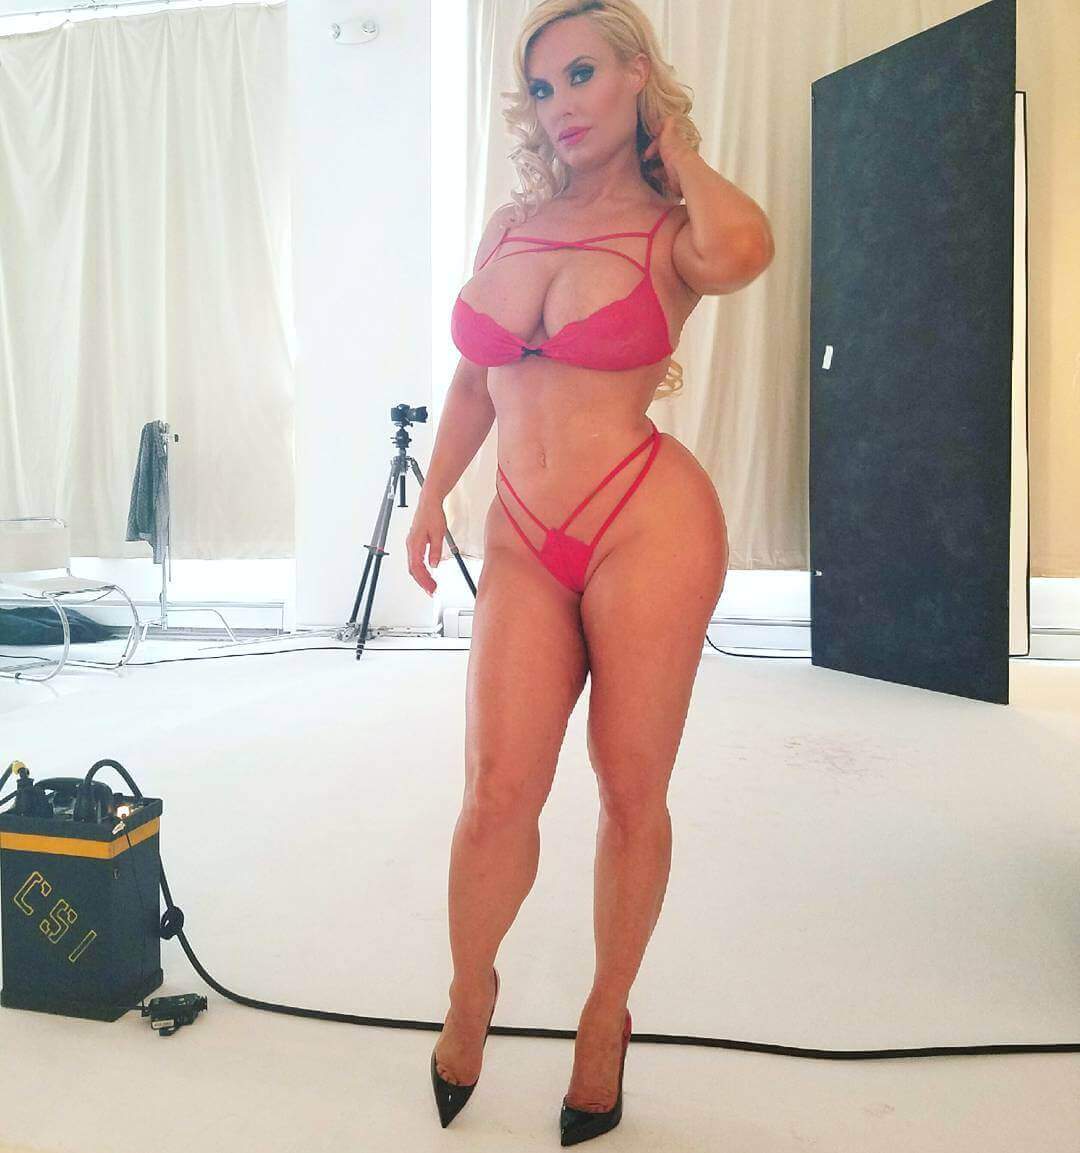 60+ Sexy Coco Austin Boobs Pictures Will Make You Want To Play With Them | Best Of Comic Books